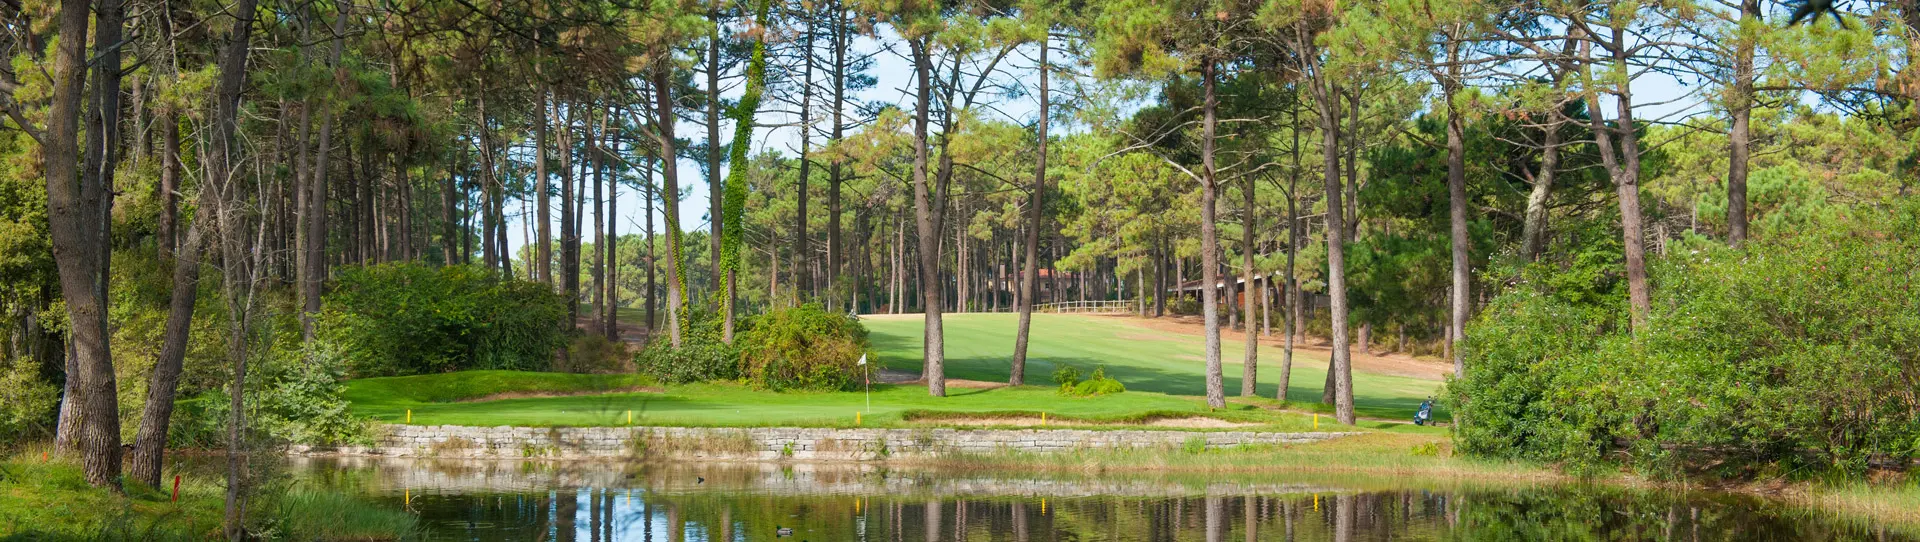 Portugal golf courses - Aroeira Pines Classic Golf Course - Photo 1